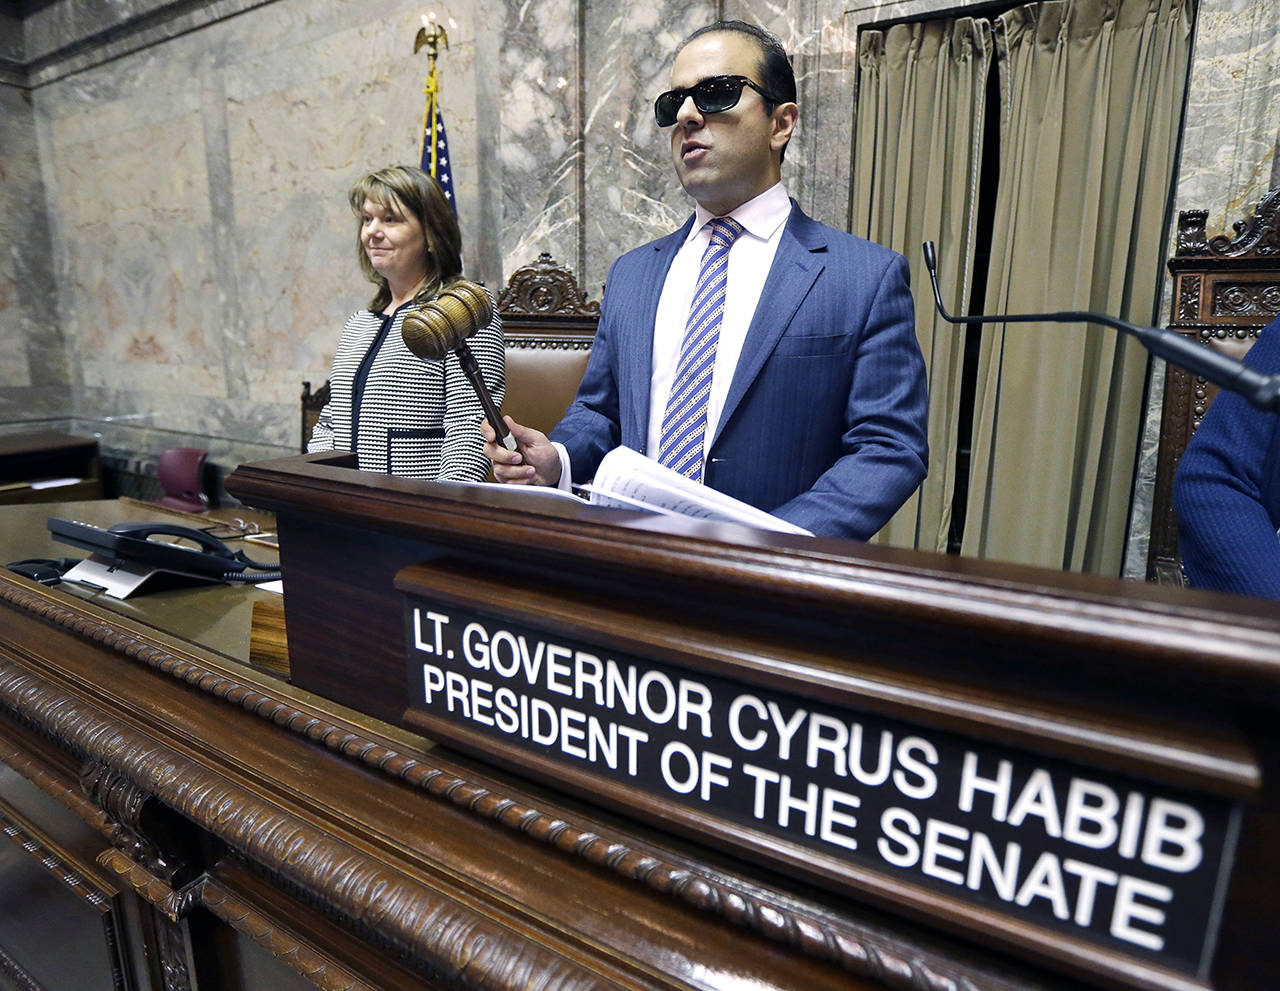 Washington Lt. Gov. Cyrus Habib (right) holds the gavel at the Senate chamber dais next to Senate Counsel Jeannie Gorrell on Jan. 5, 2017, during a practice session to test technical equipment in Olympia. (AP Photo/Ted S. Warren)